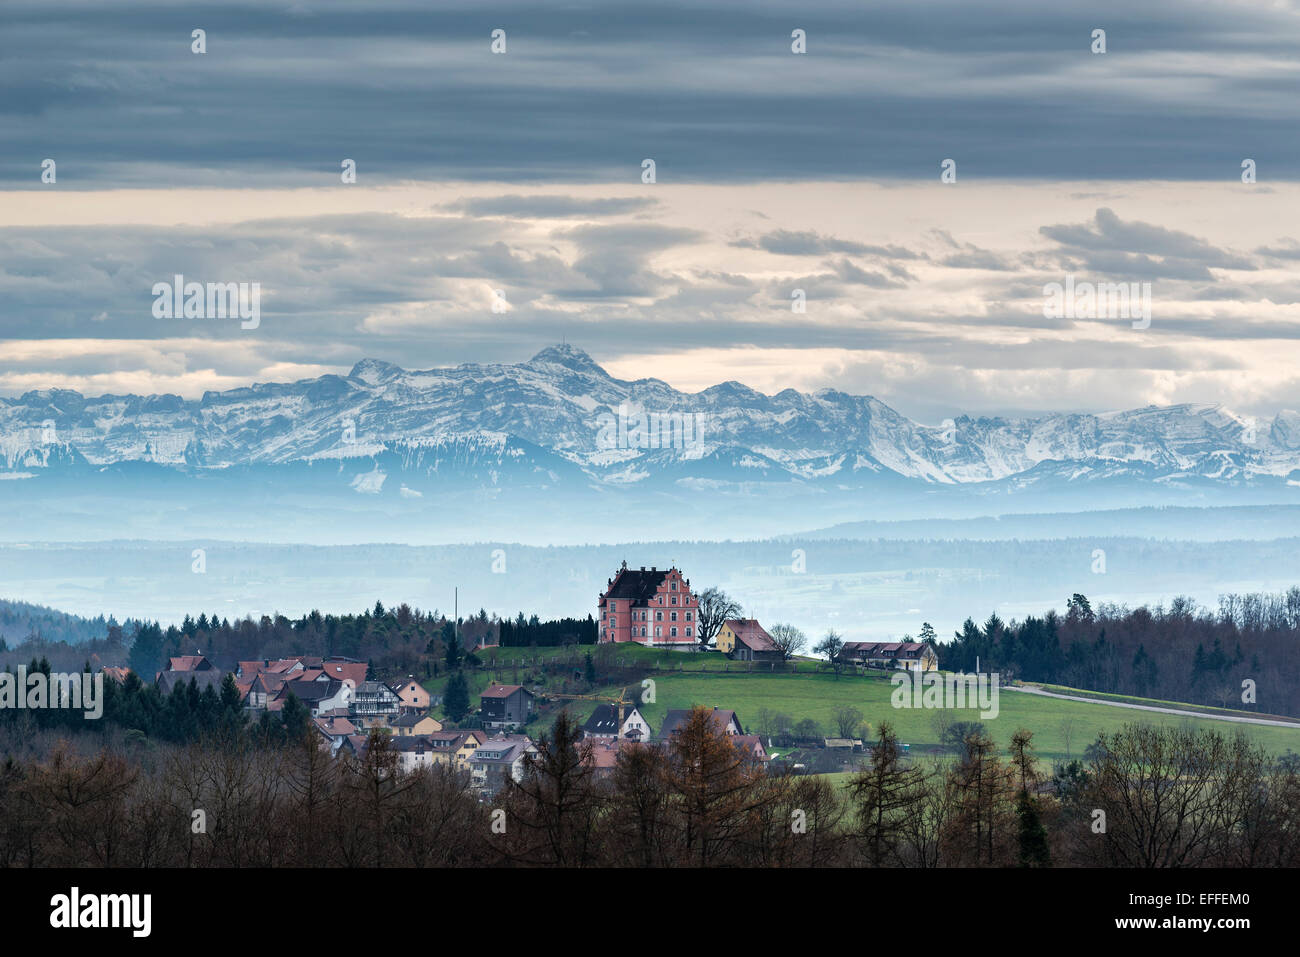 Germany, Baden-Wuerttemberg, Constance district, View over Bodanrueck to Freudental Castle, in the backgrount Swiss Alps with Saentis, Foehn clouds Stock Photo